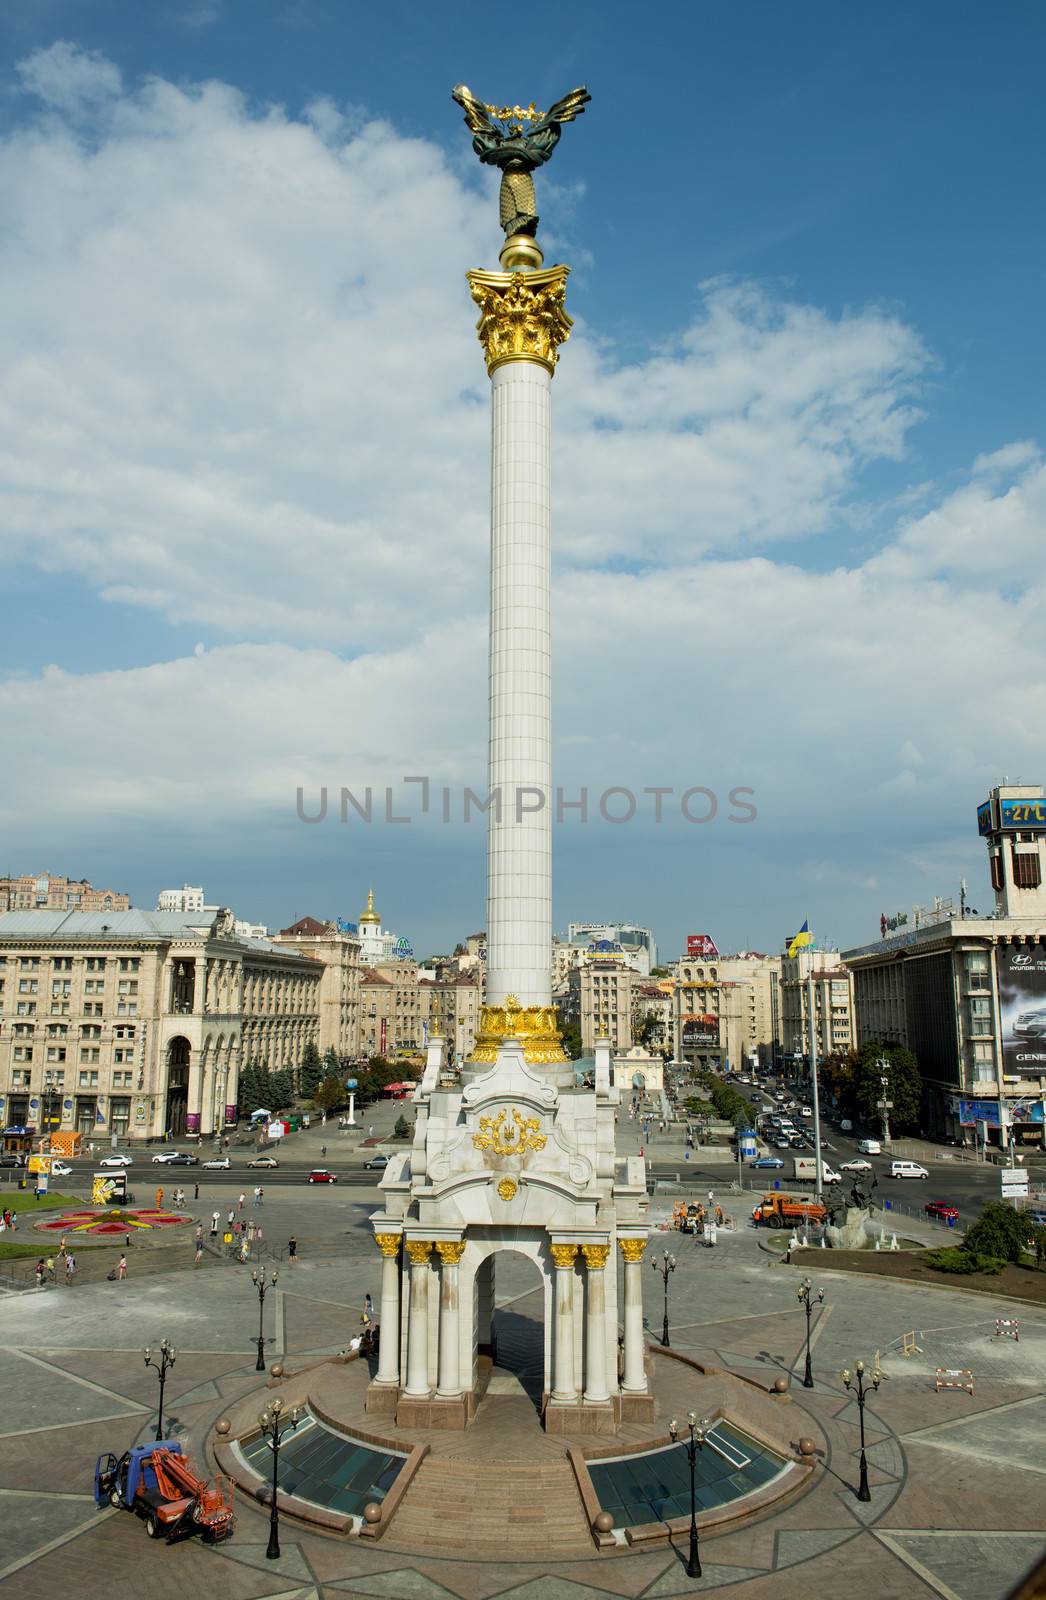 The Independence Square in Kiev, Ukraine by Alenmax